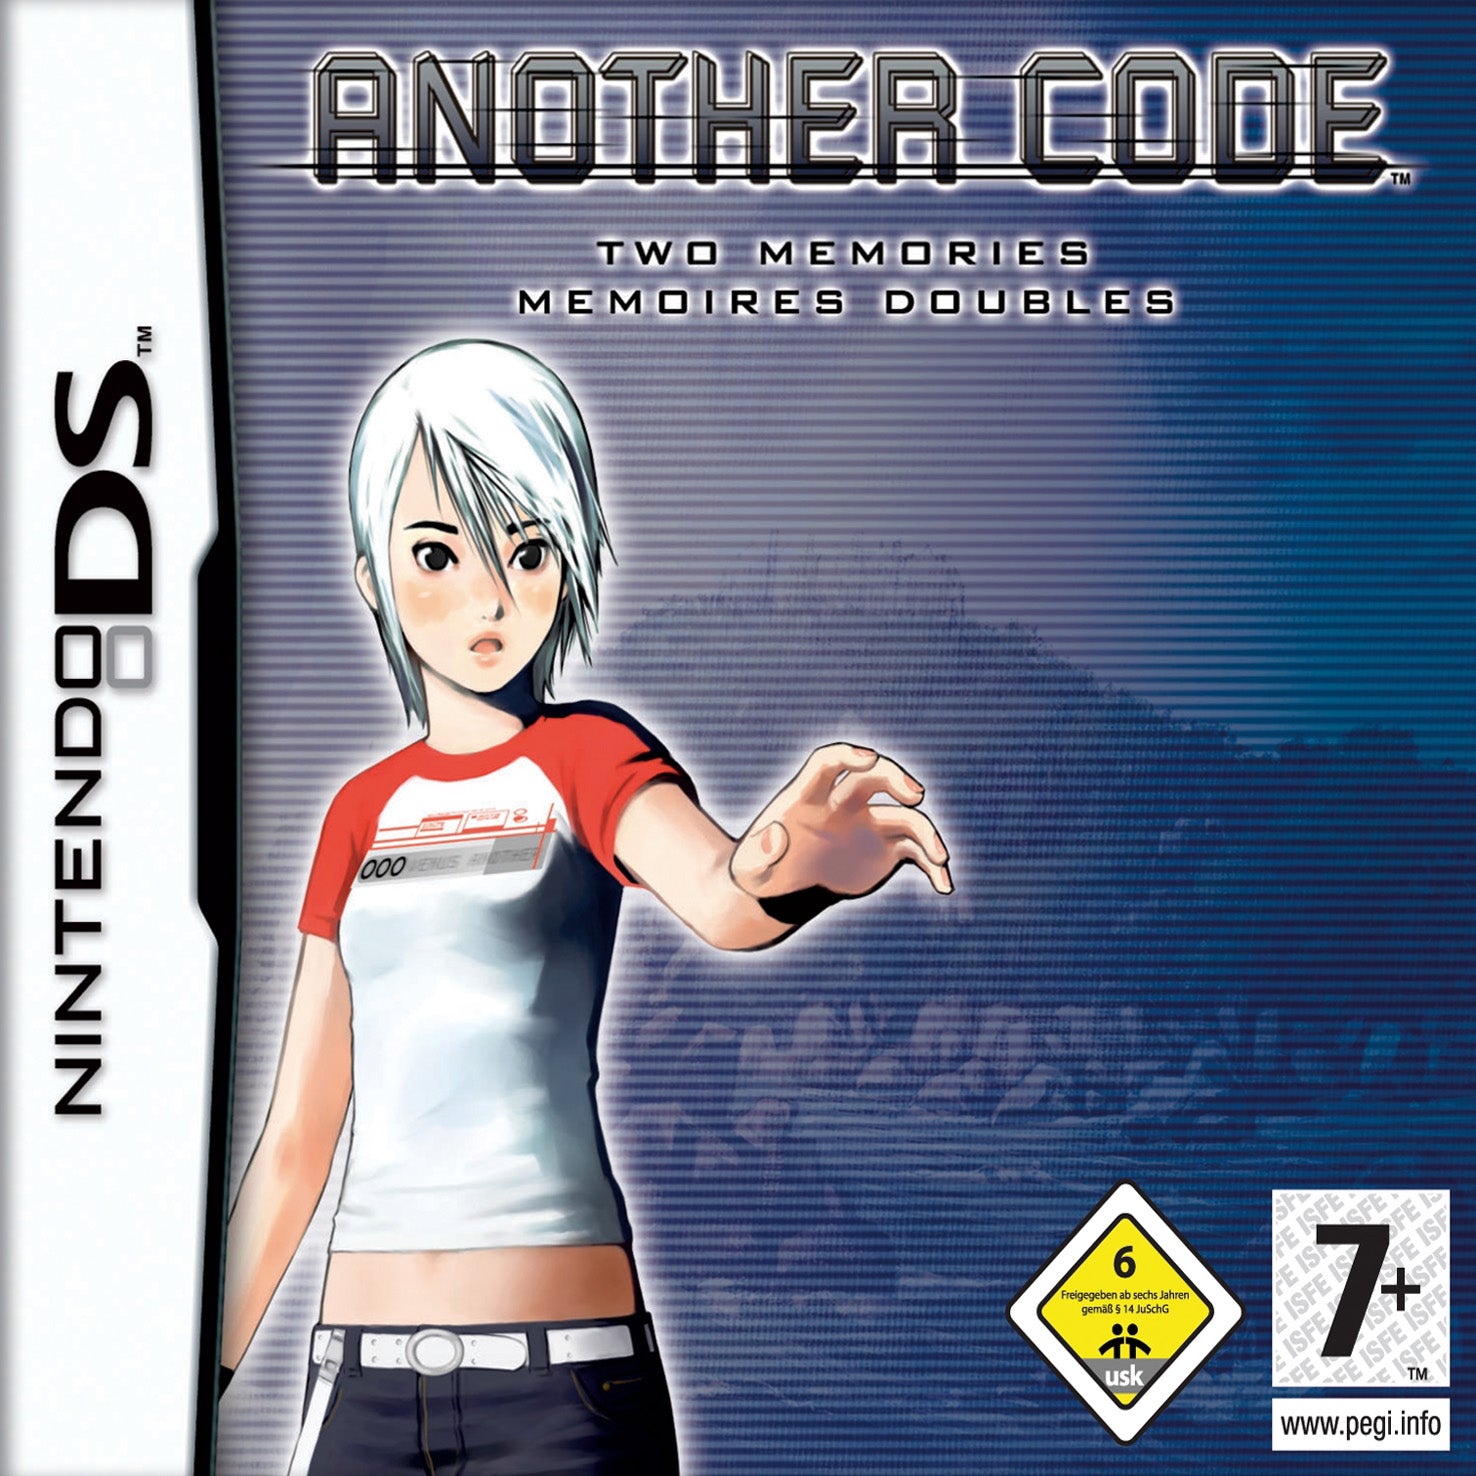 Game | Nintendo DS | Another Code Two Memories